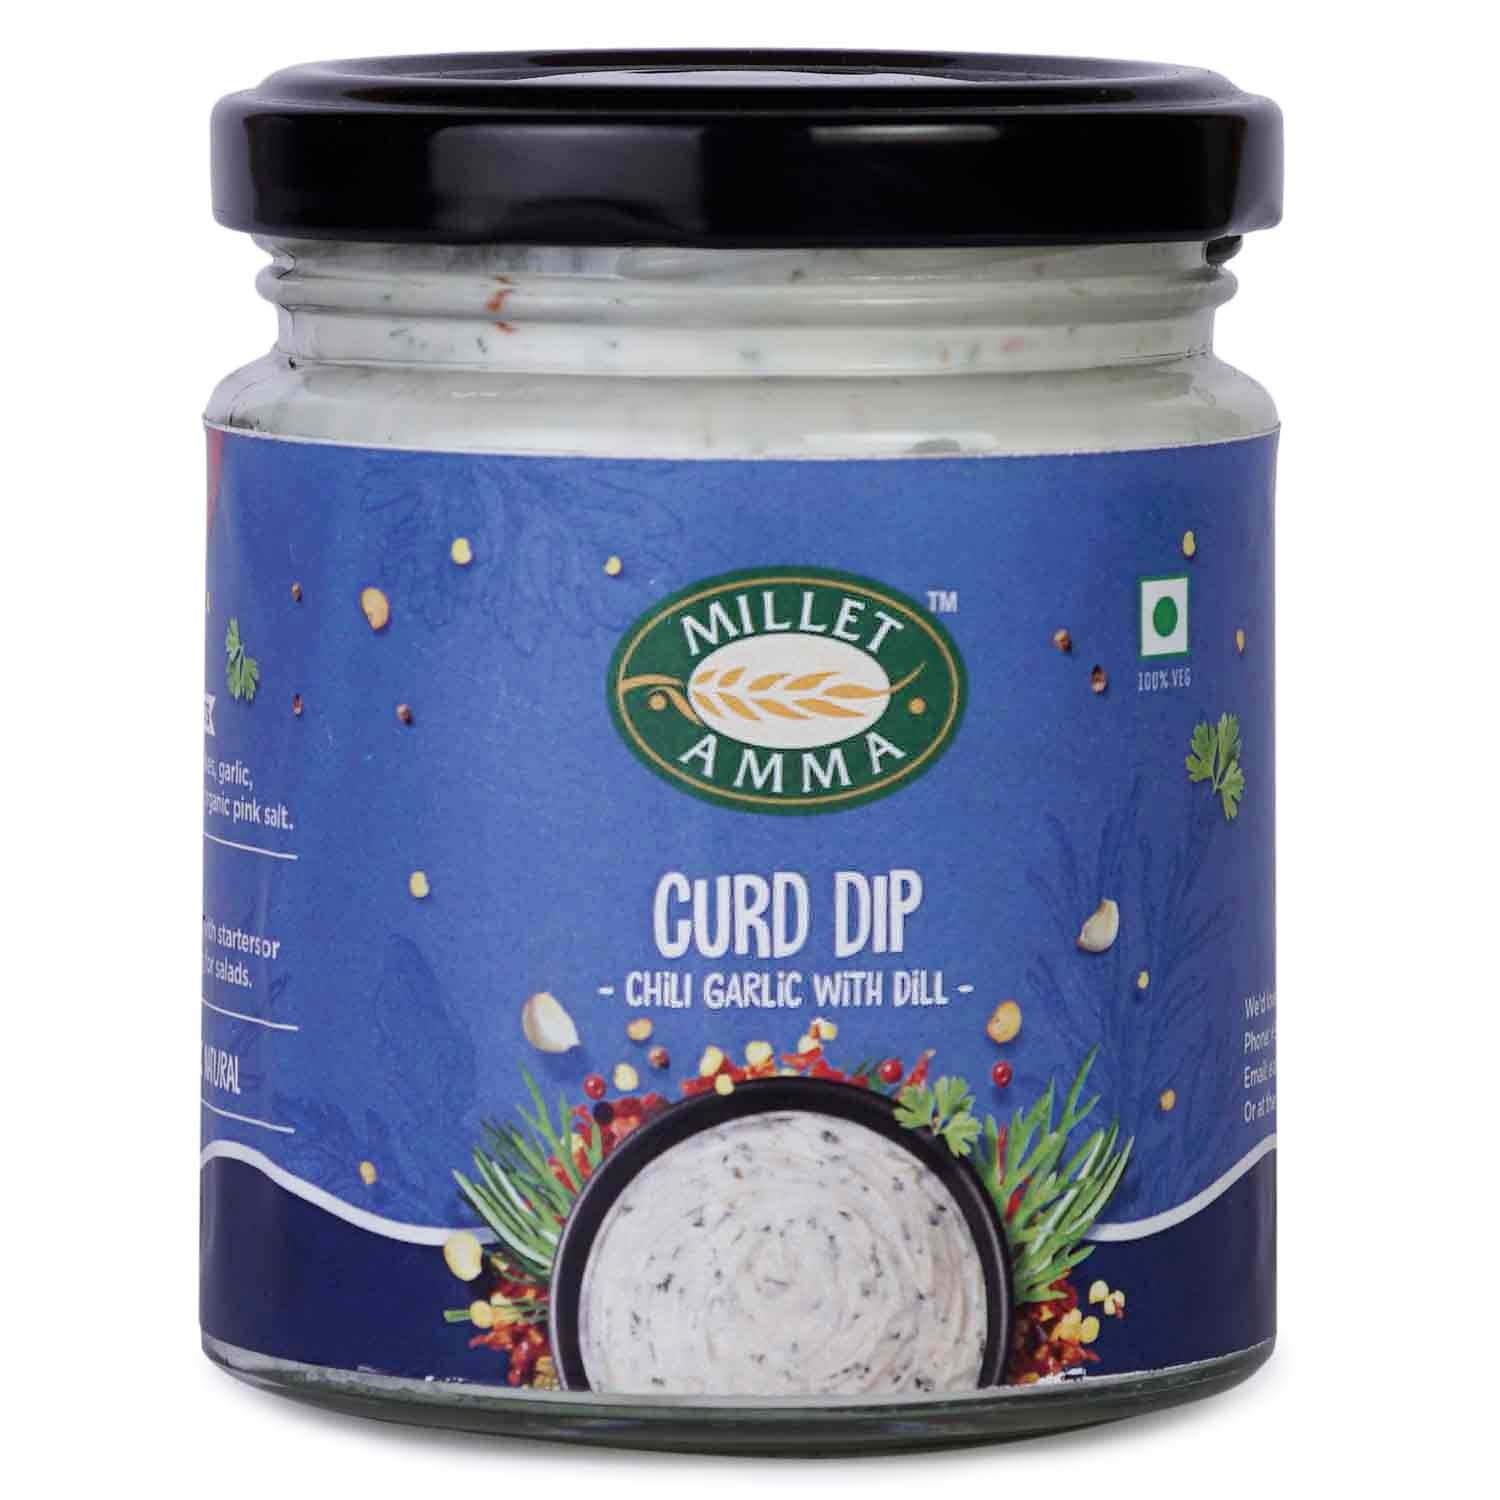 Millet Amma’s Organic Chili Garlic Dil Curd Dip- Are you sick of eating healthy snacks that have no flavor? Is every dip in the market full of grease and gunk? We’ve got you covered! Millet Amma’s Organic Chili Garlic Curd Dip is a yummy and versatile dip that also has the added benefit of helping with digestion.  Made from Curd, Chili Flakes and Dill Leaves, it is a perfect dip to make any healthy snack tasty.